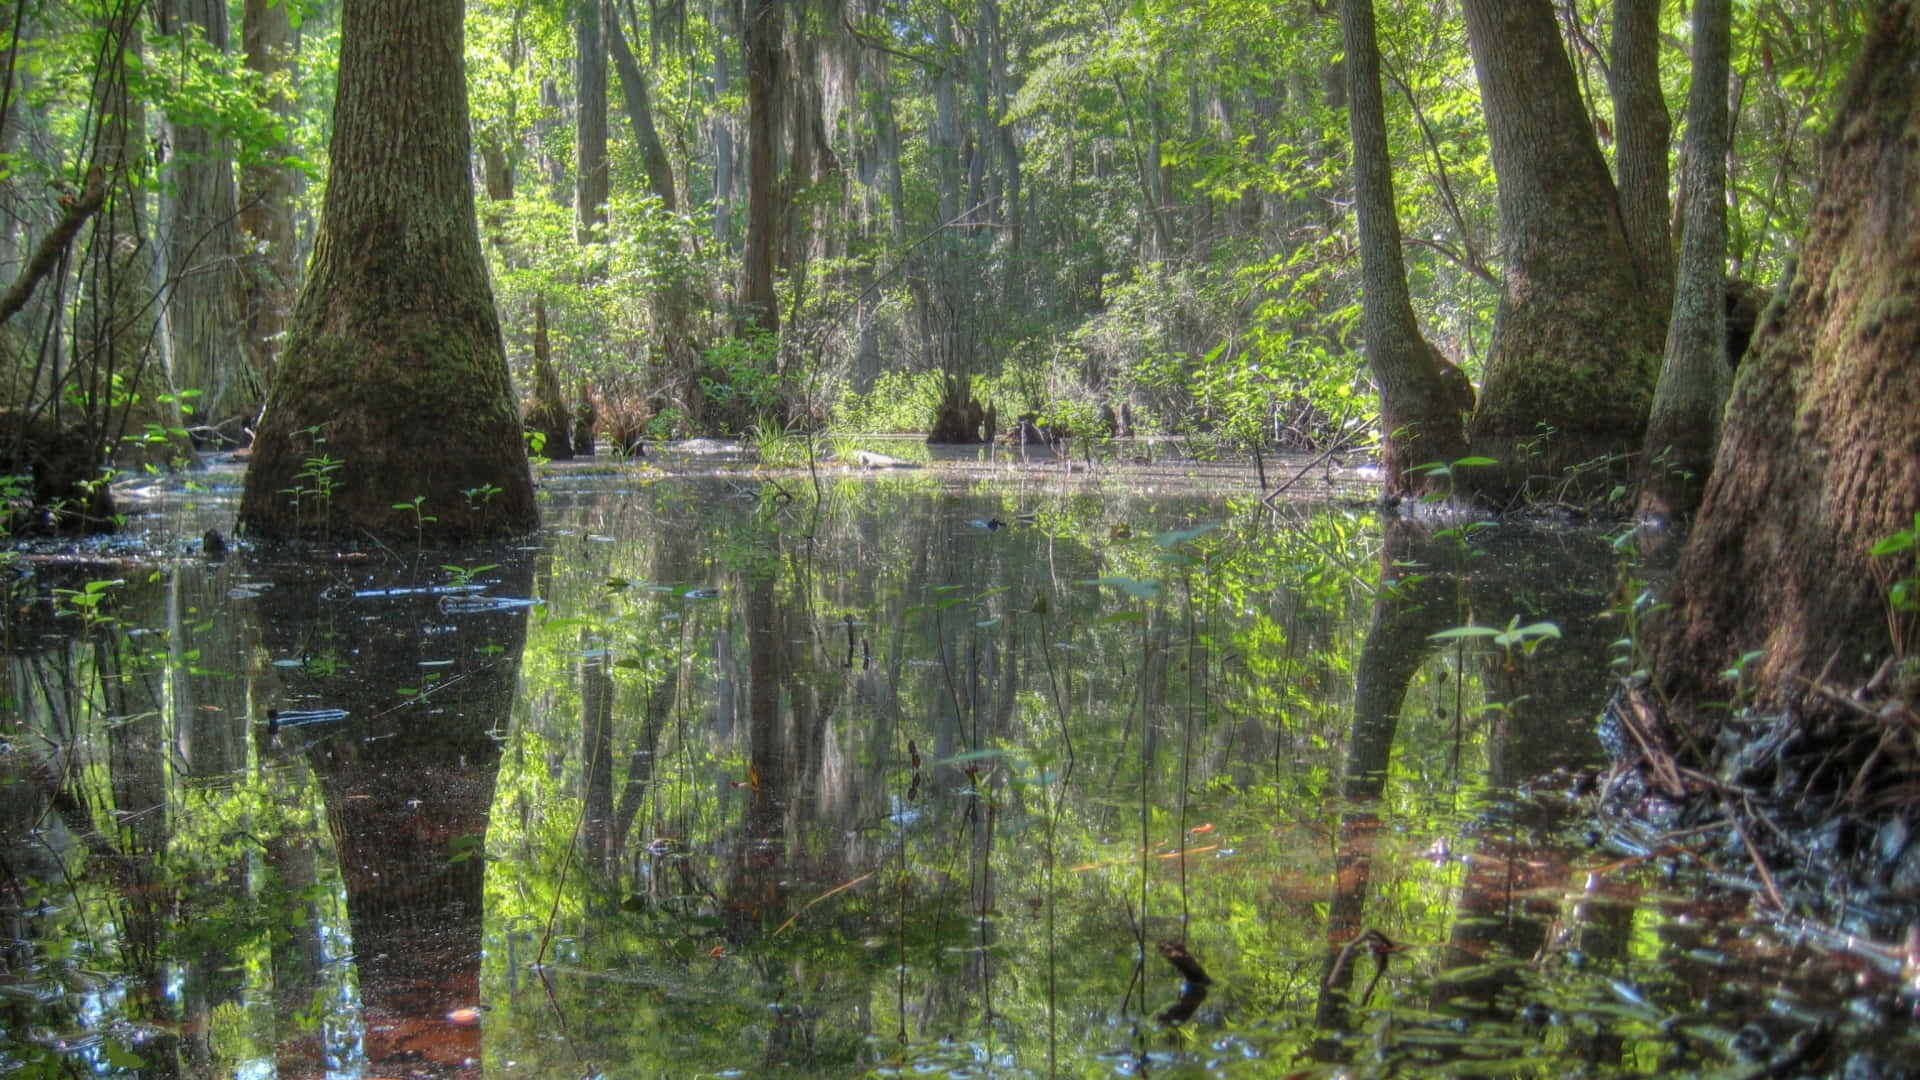 A tranquil view of a swamp's reflection in still water